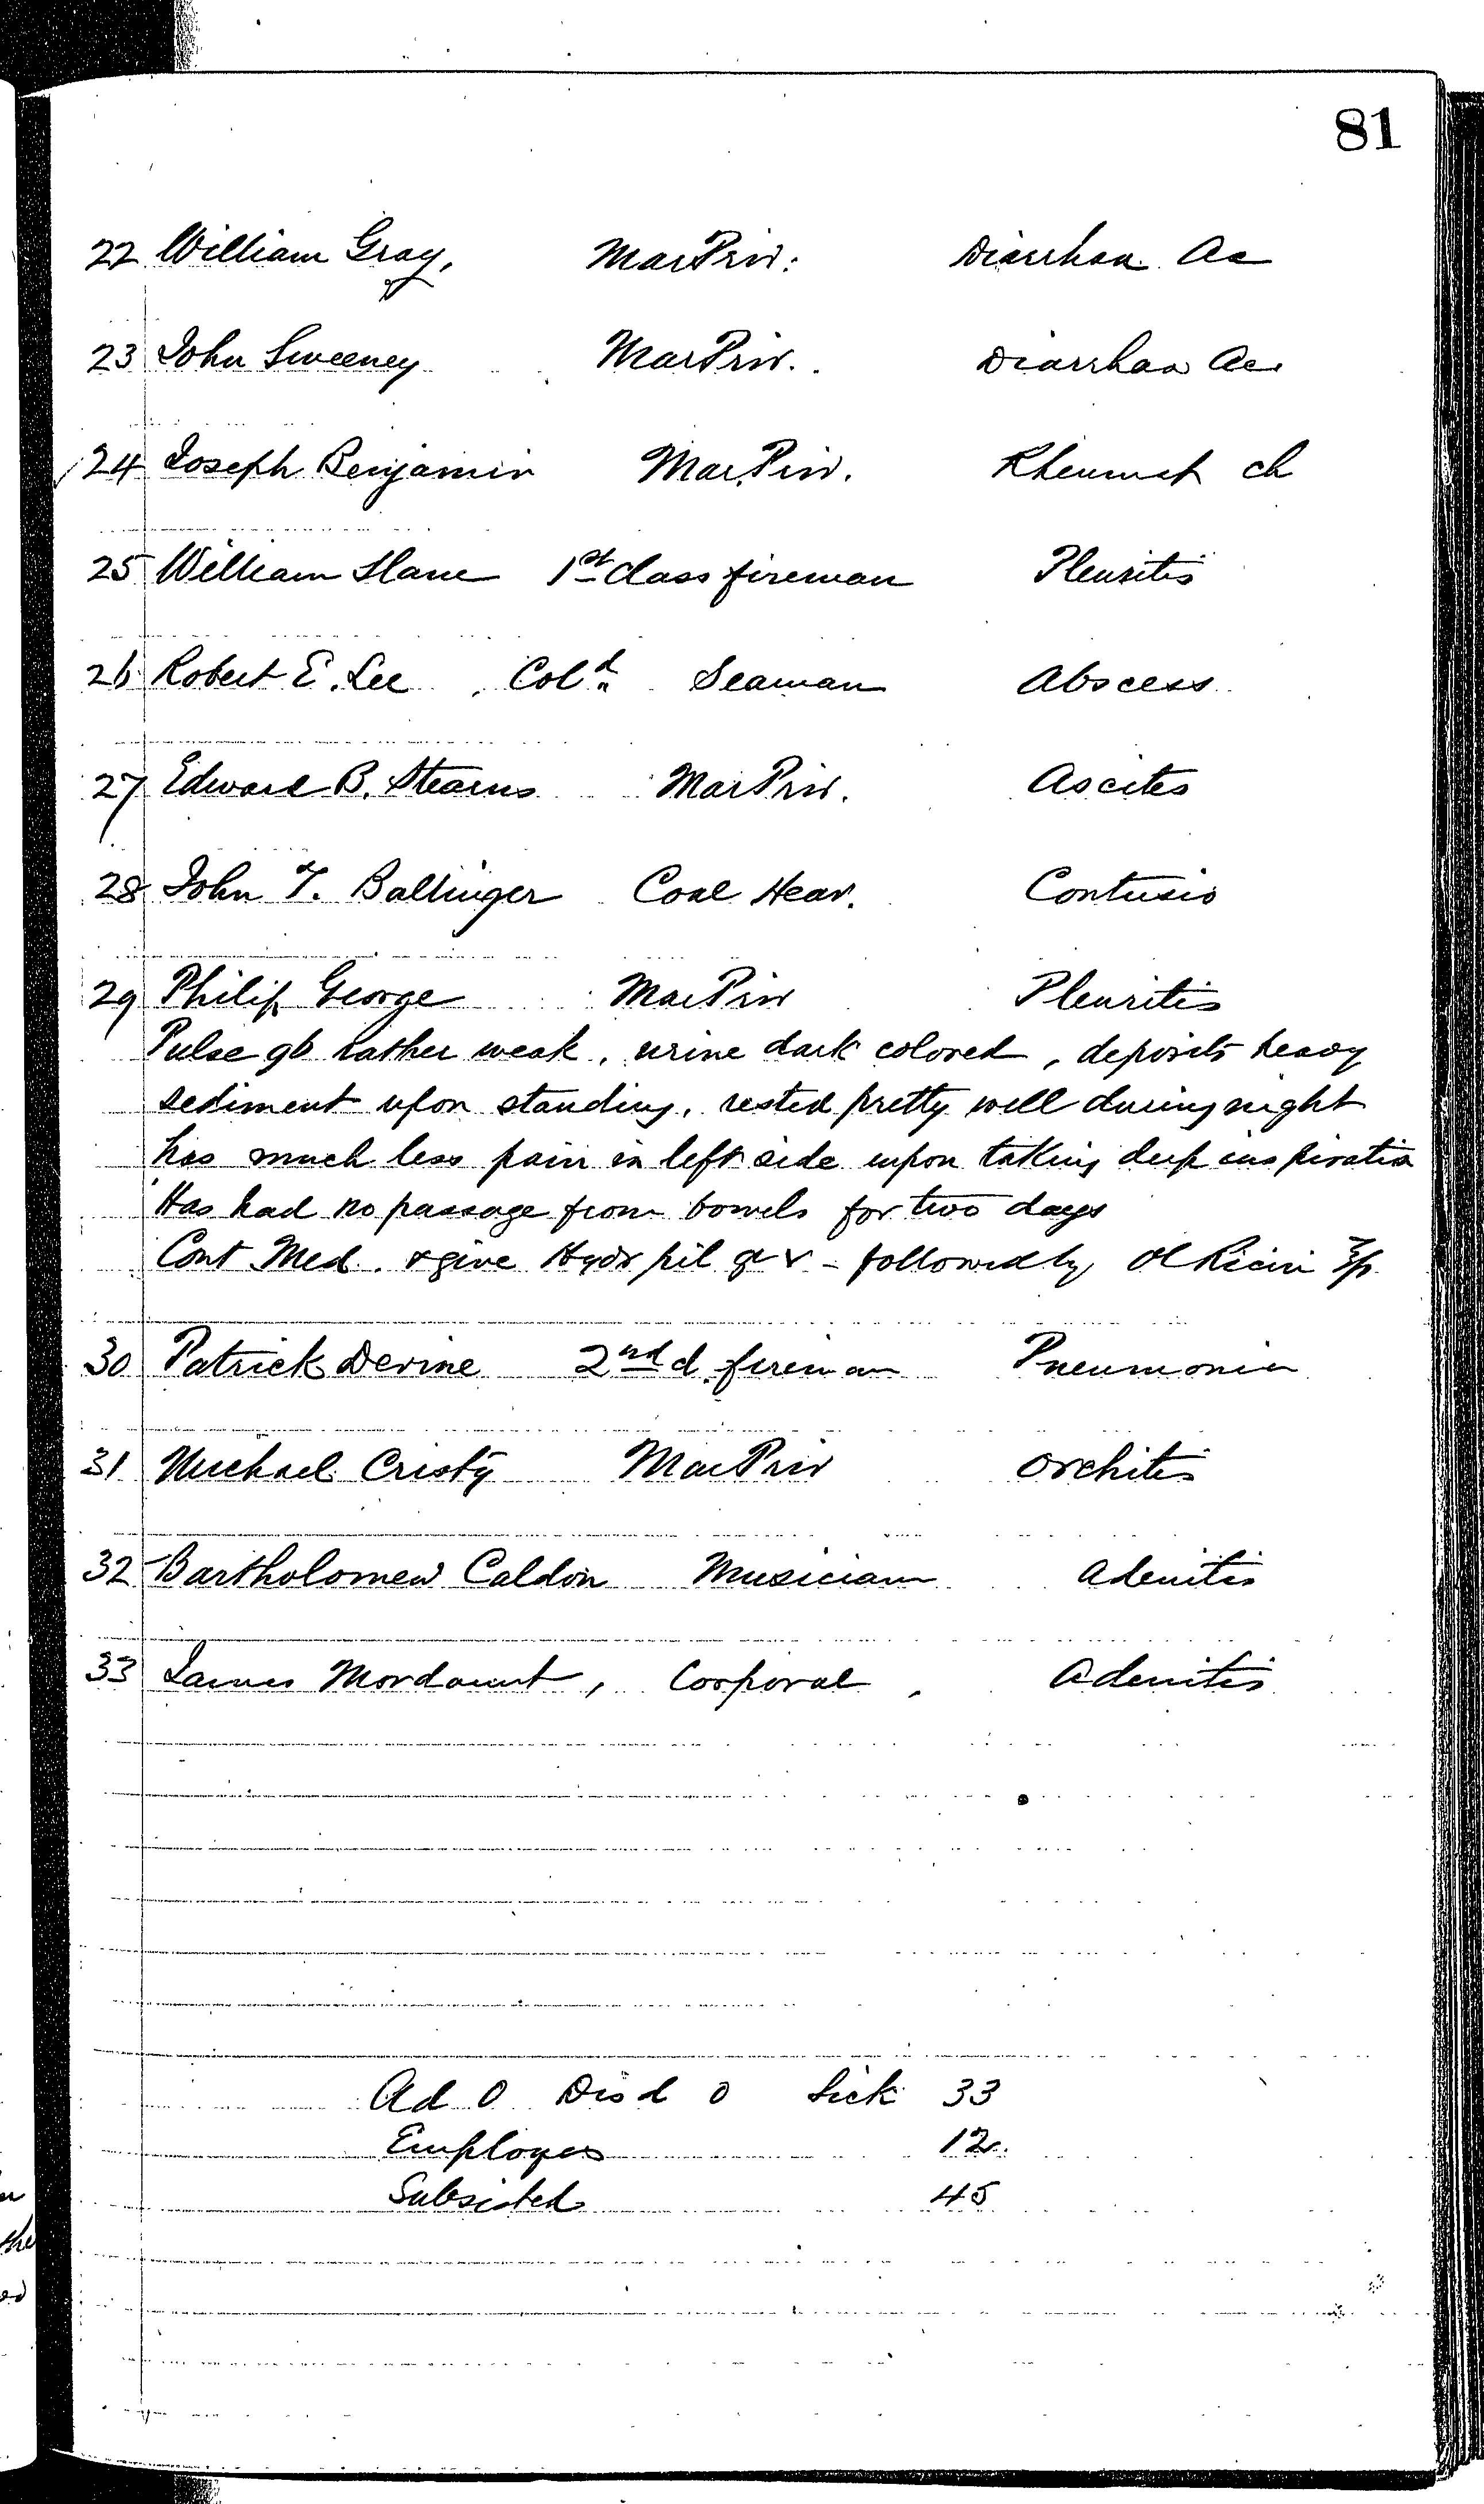 Patients in the Naval Hospital, Washington DC, on November 18, 1866, page 2 of 2, in the Medical Journal, October 1, 1866 to March 20, 1867